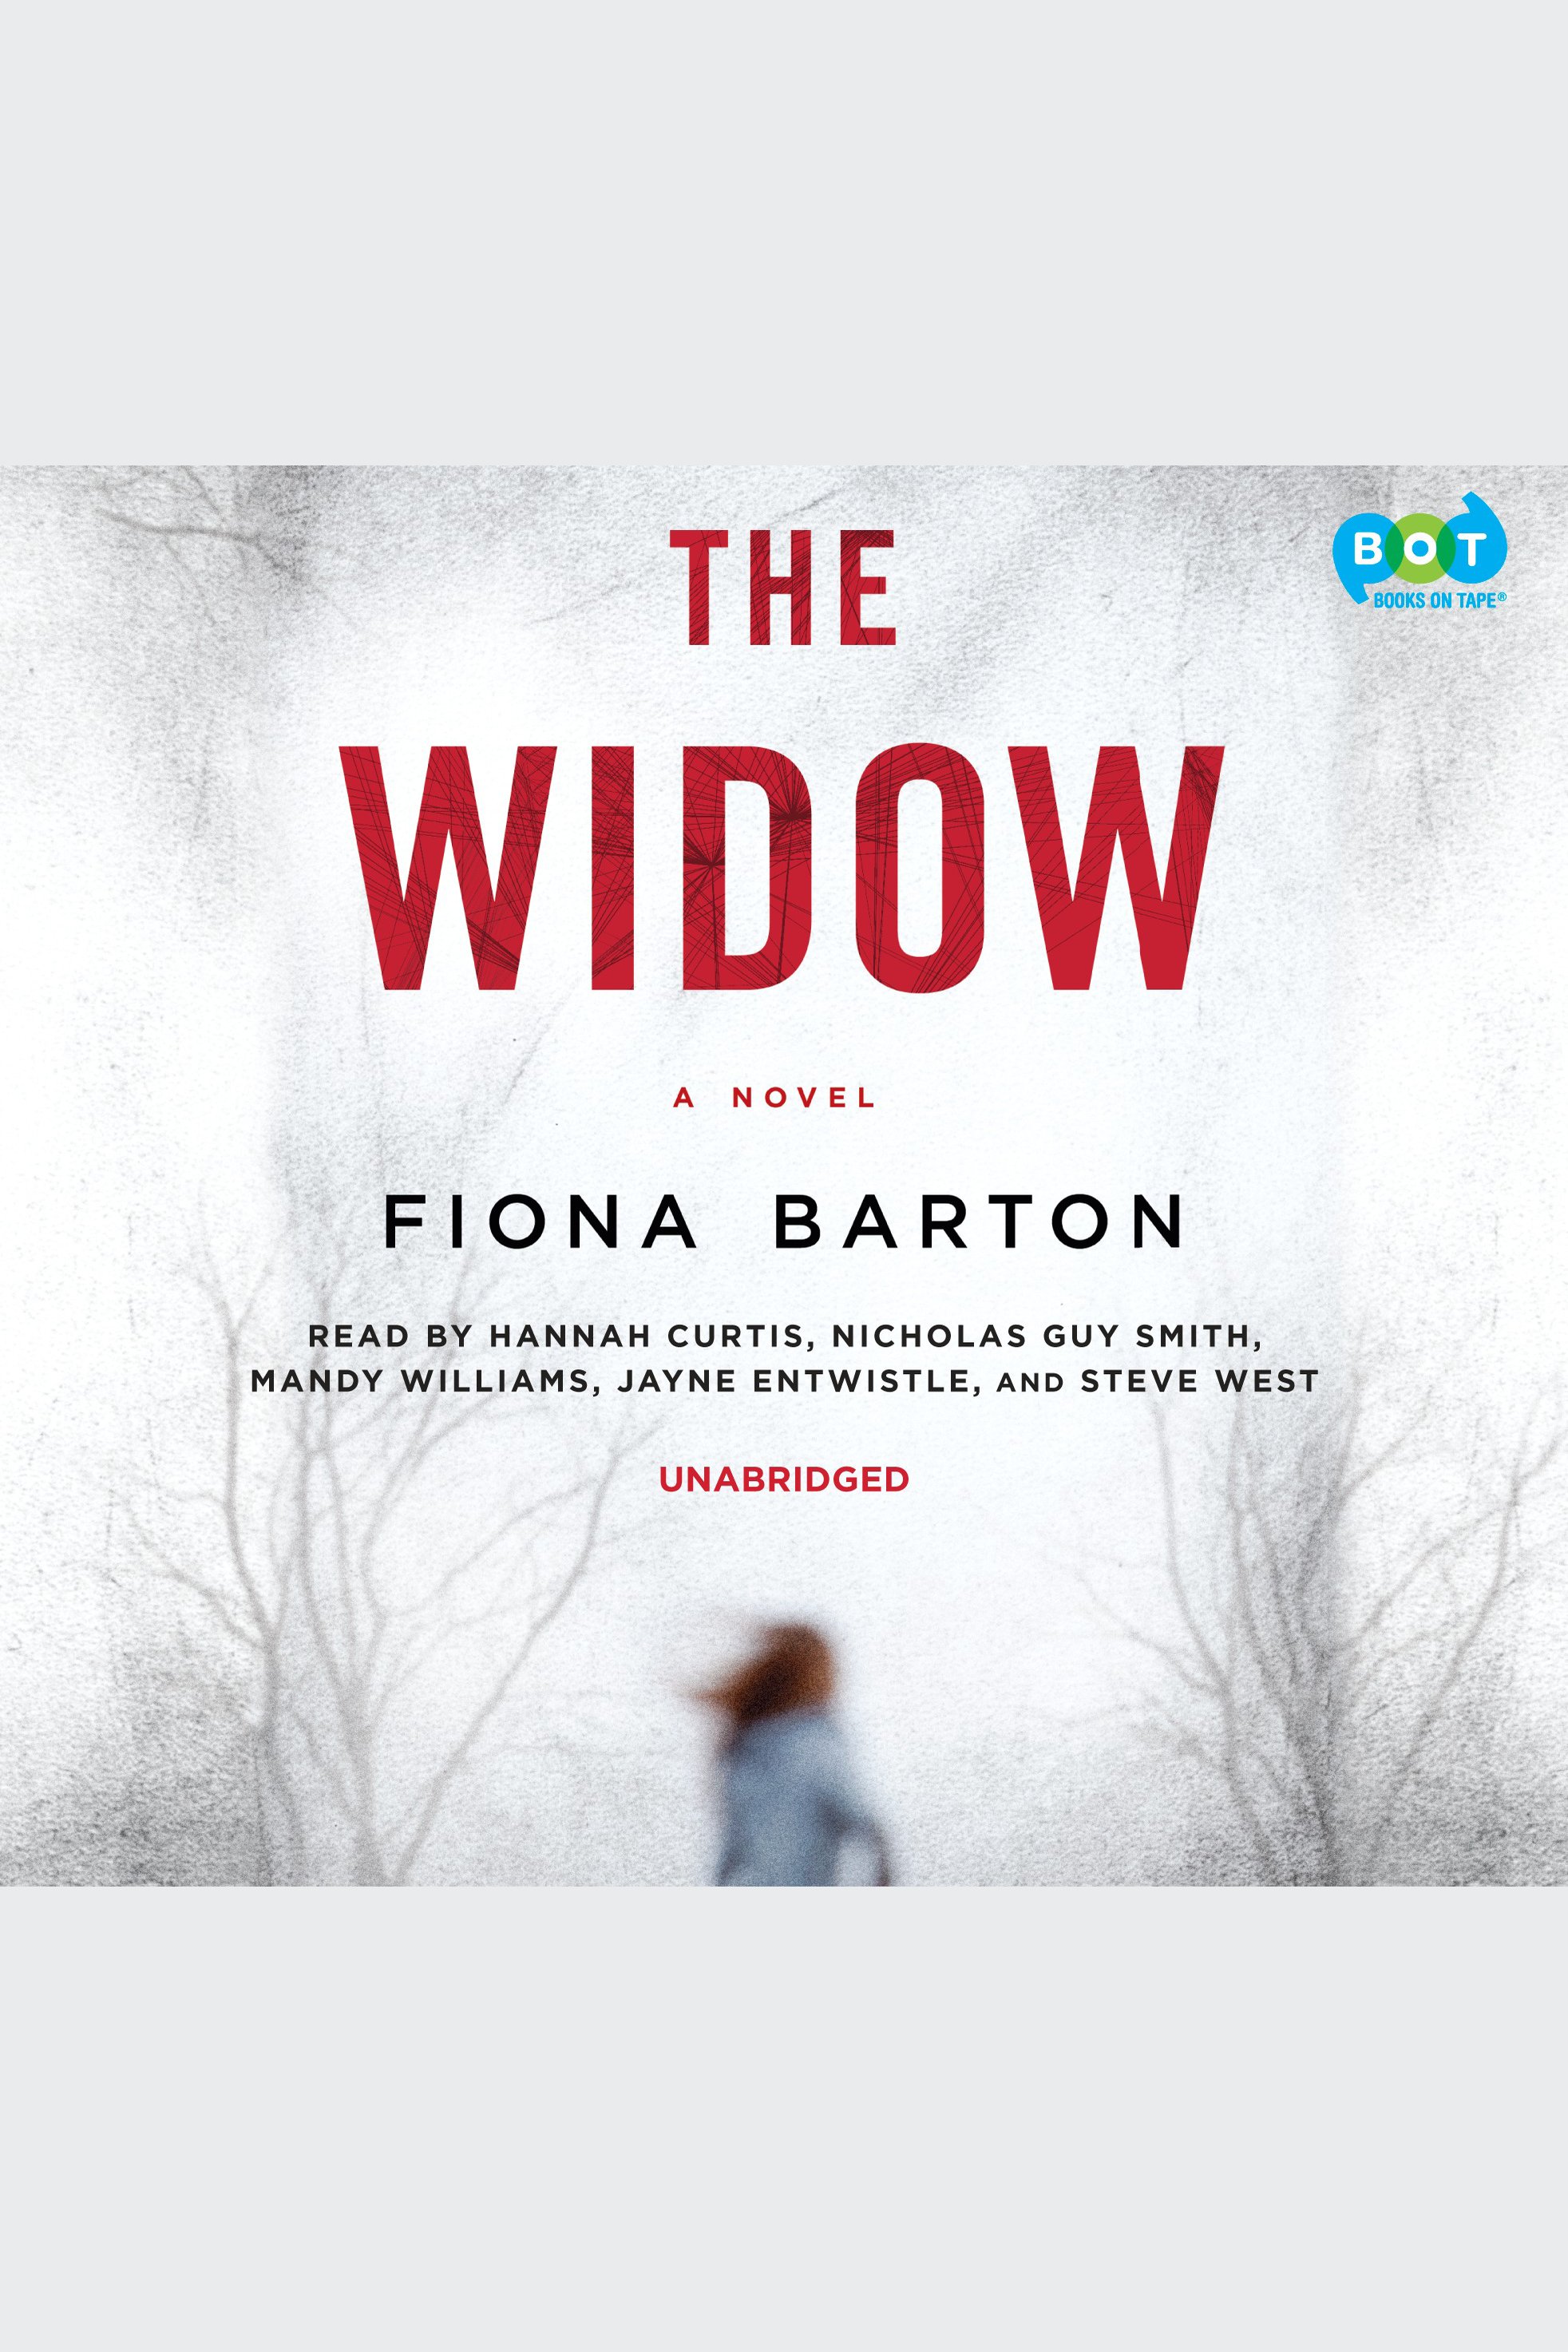 The widow cover image